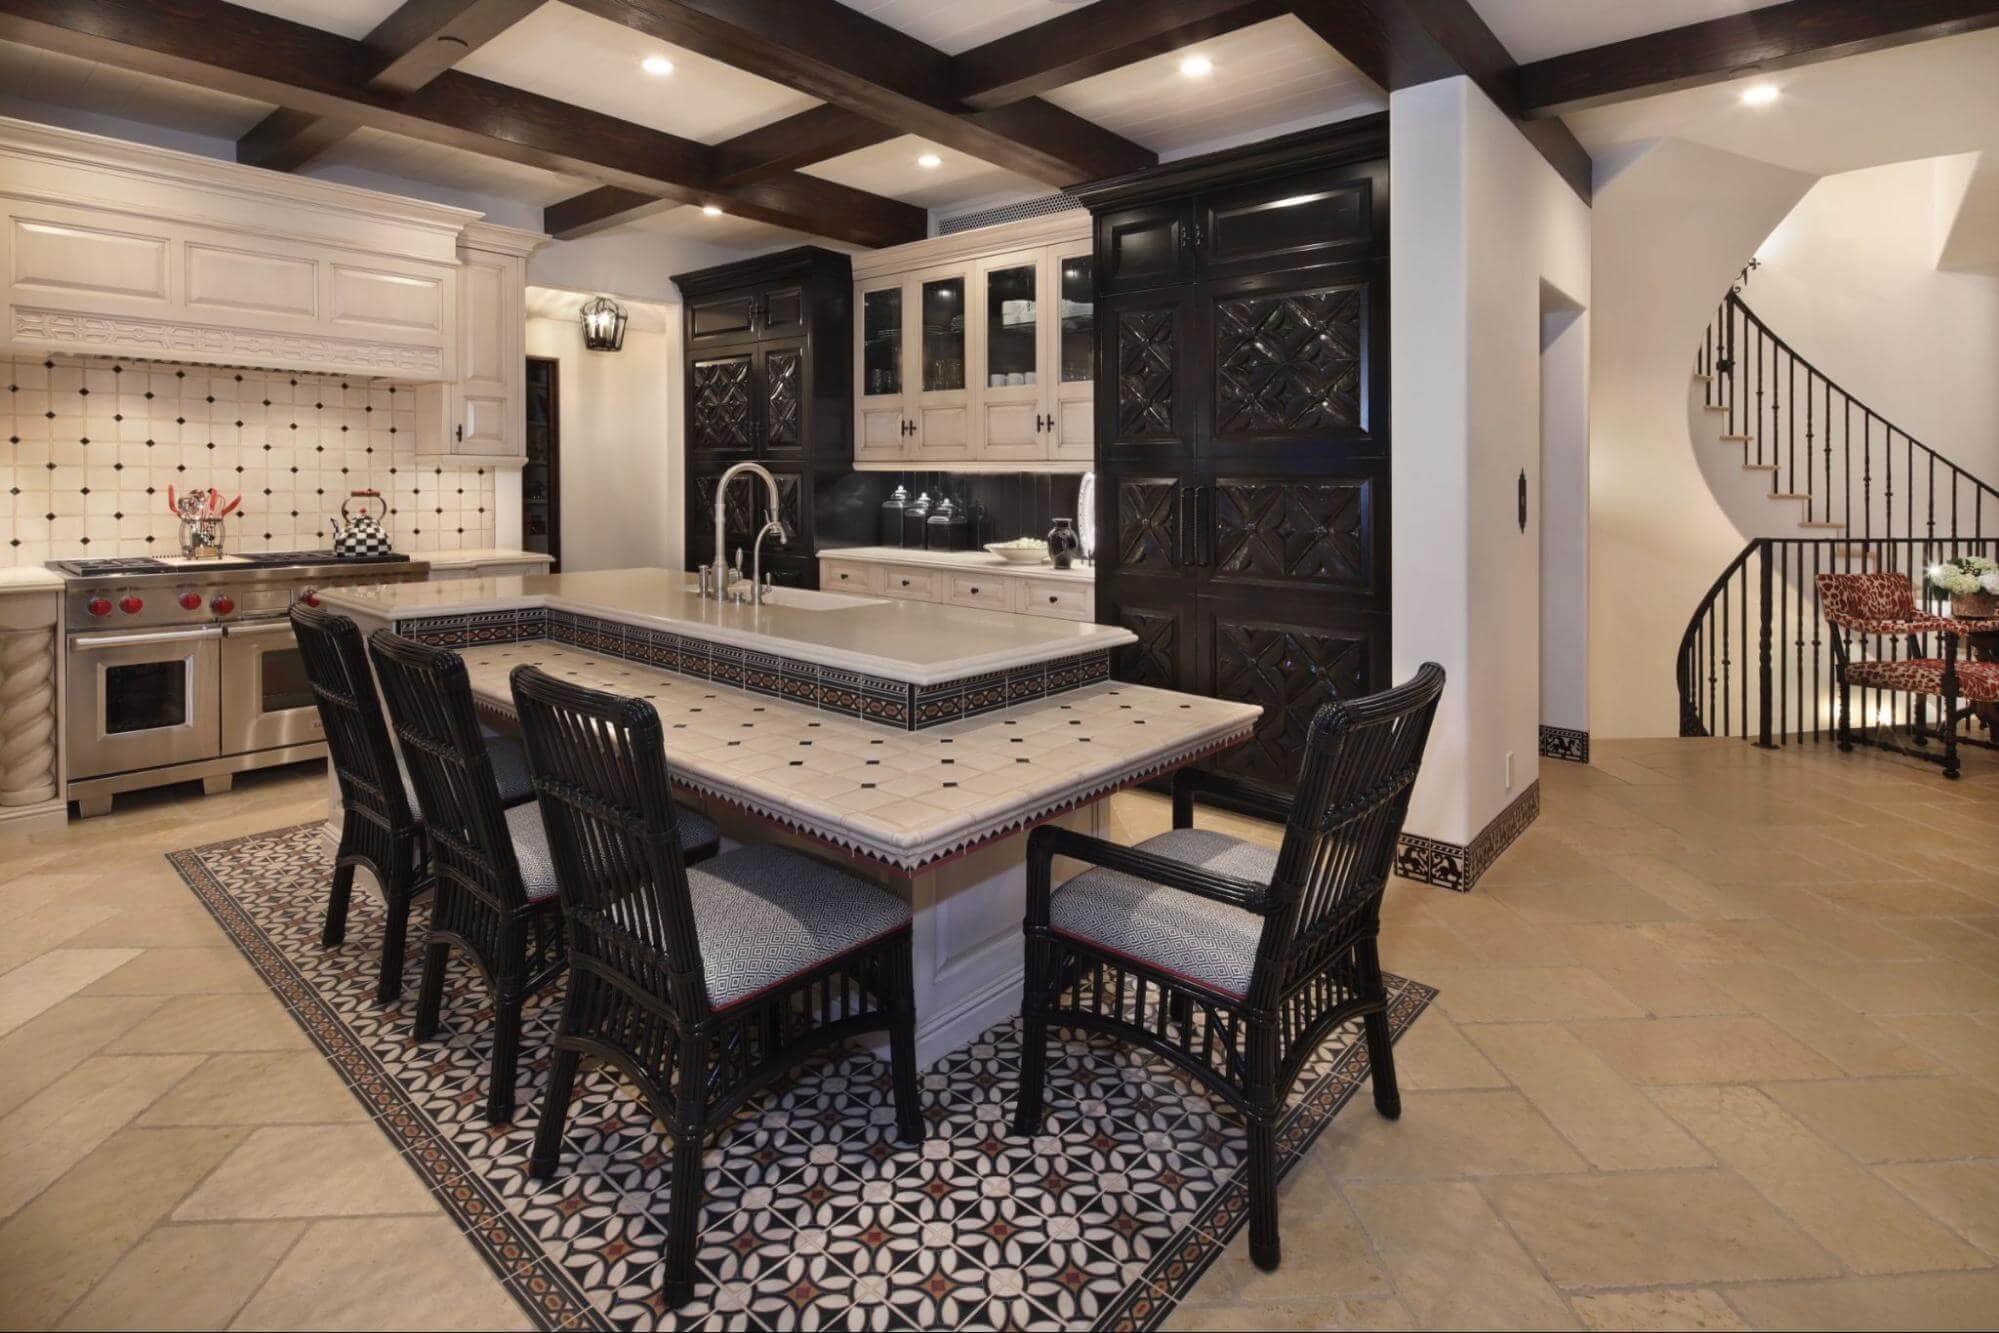 Traditional kitchen with T-cross border floor tile pattern